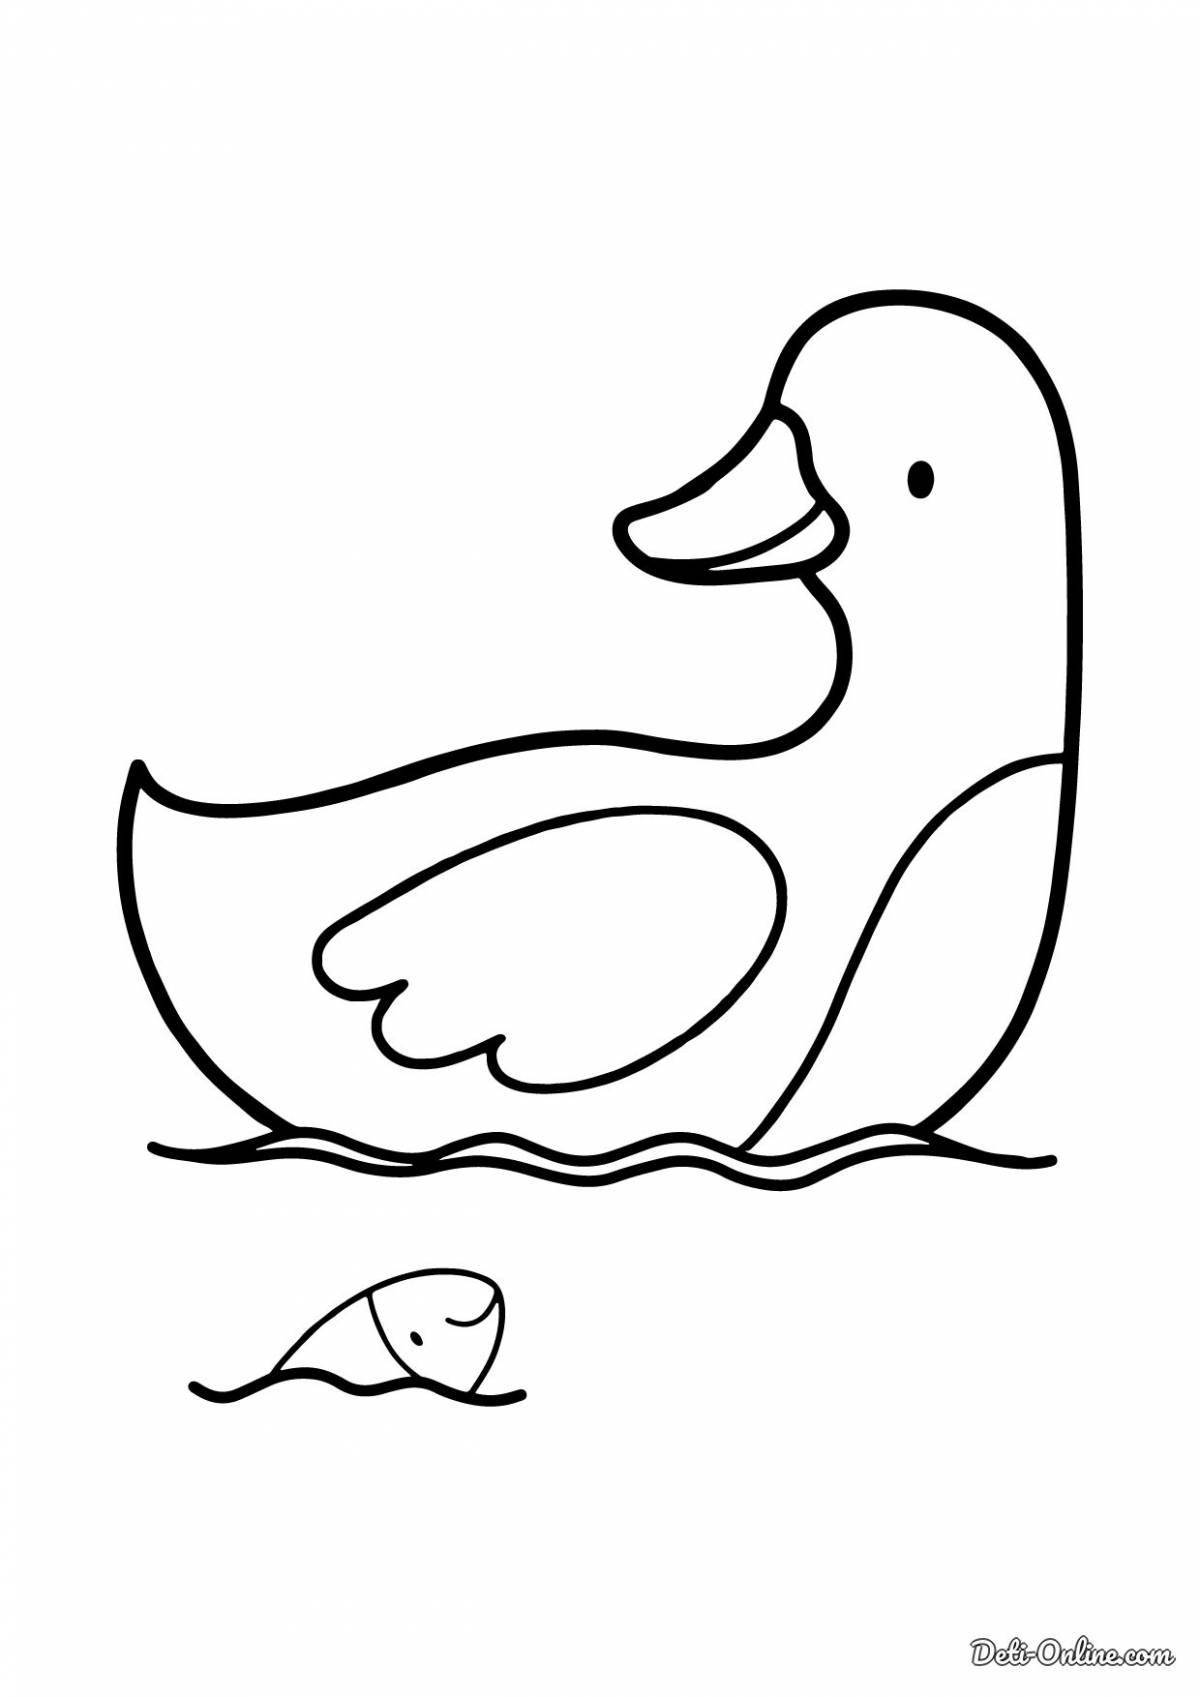 Coloring book joyful duck for children 3-4 years old